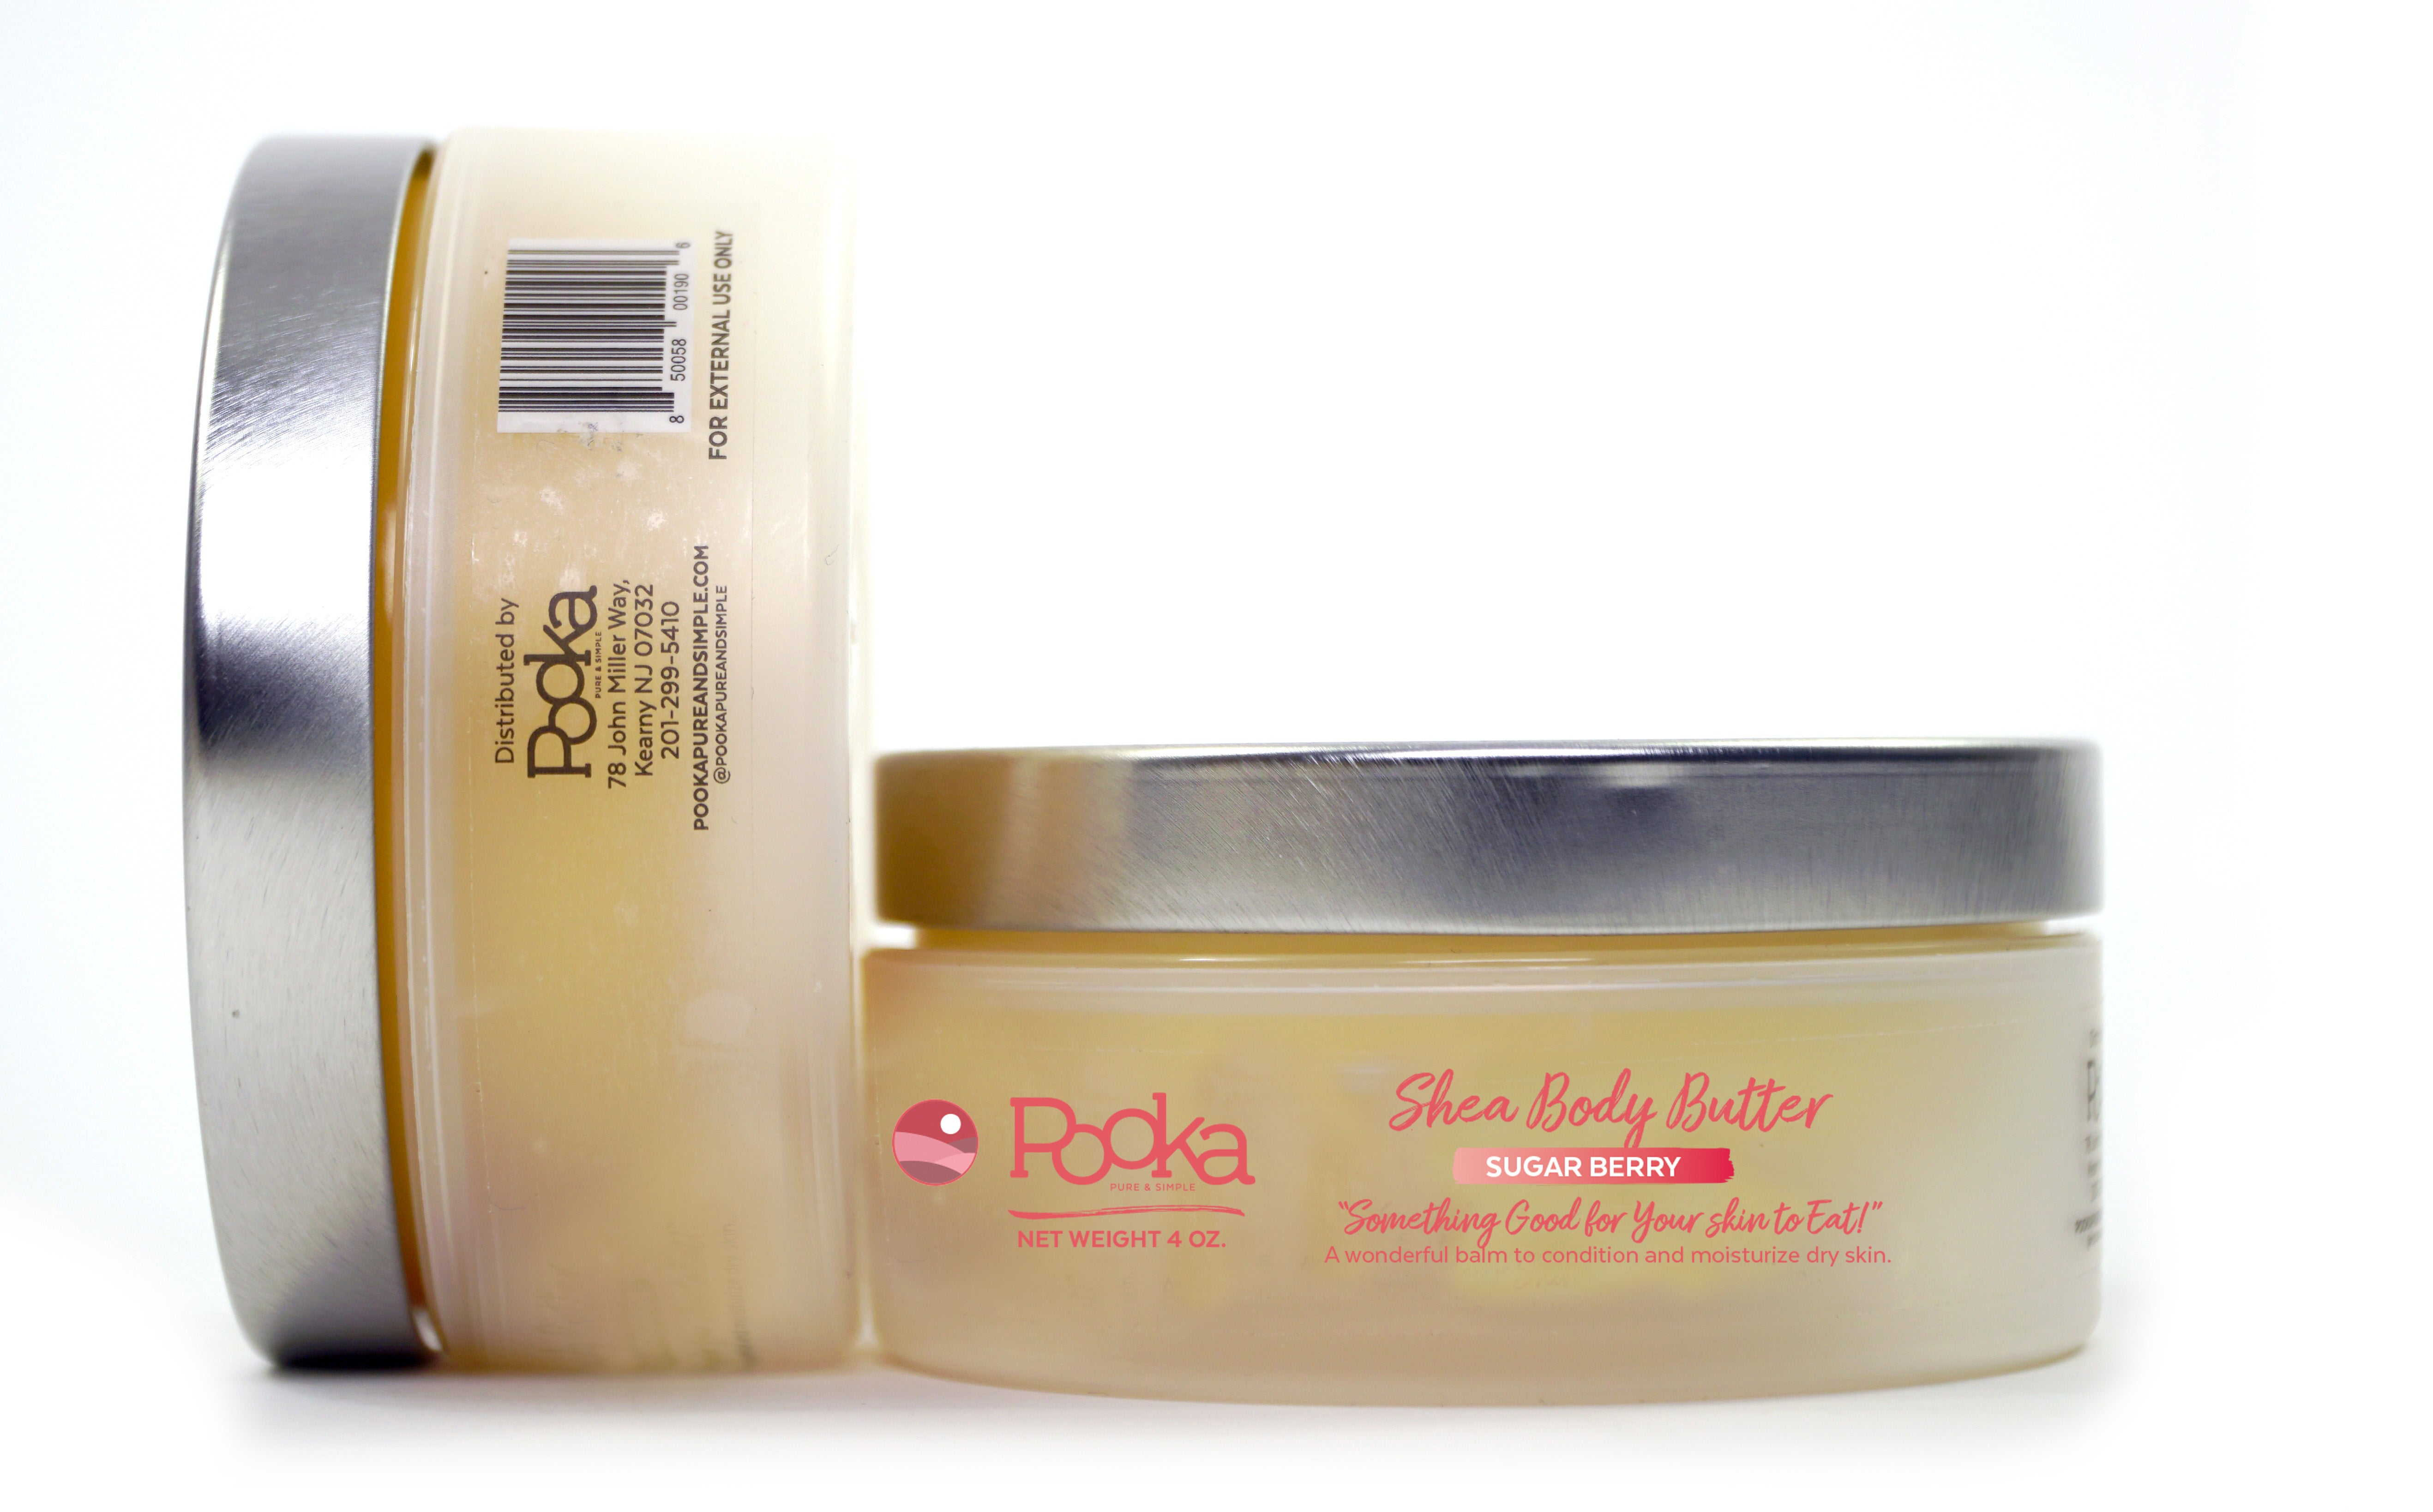 Sugar Berry Body Butter - Pooka Pure and Simple